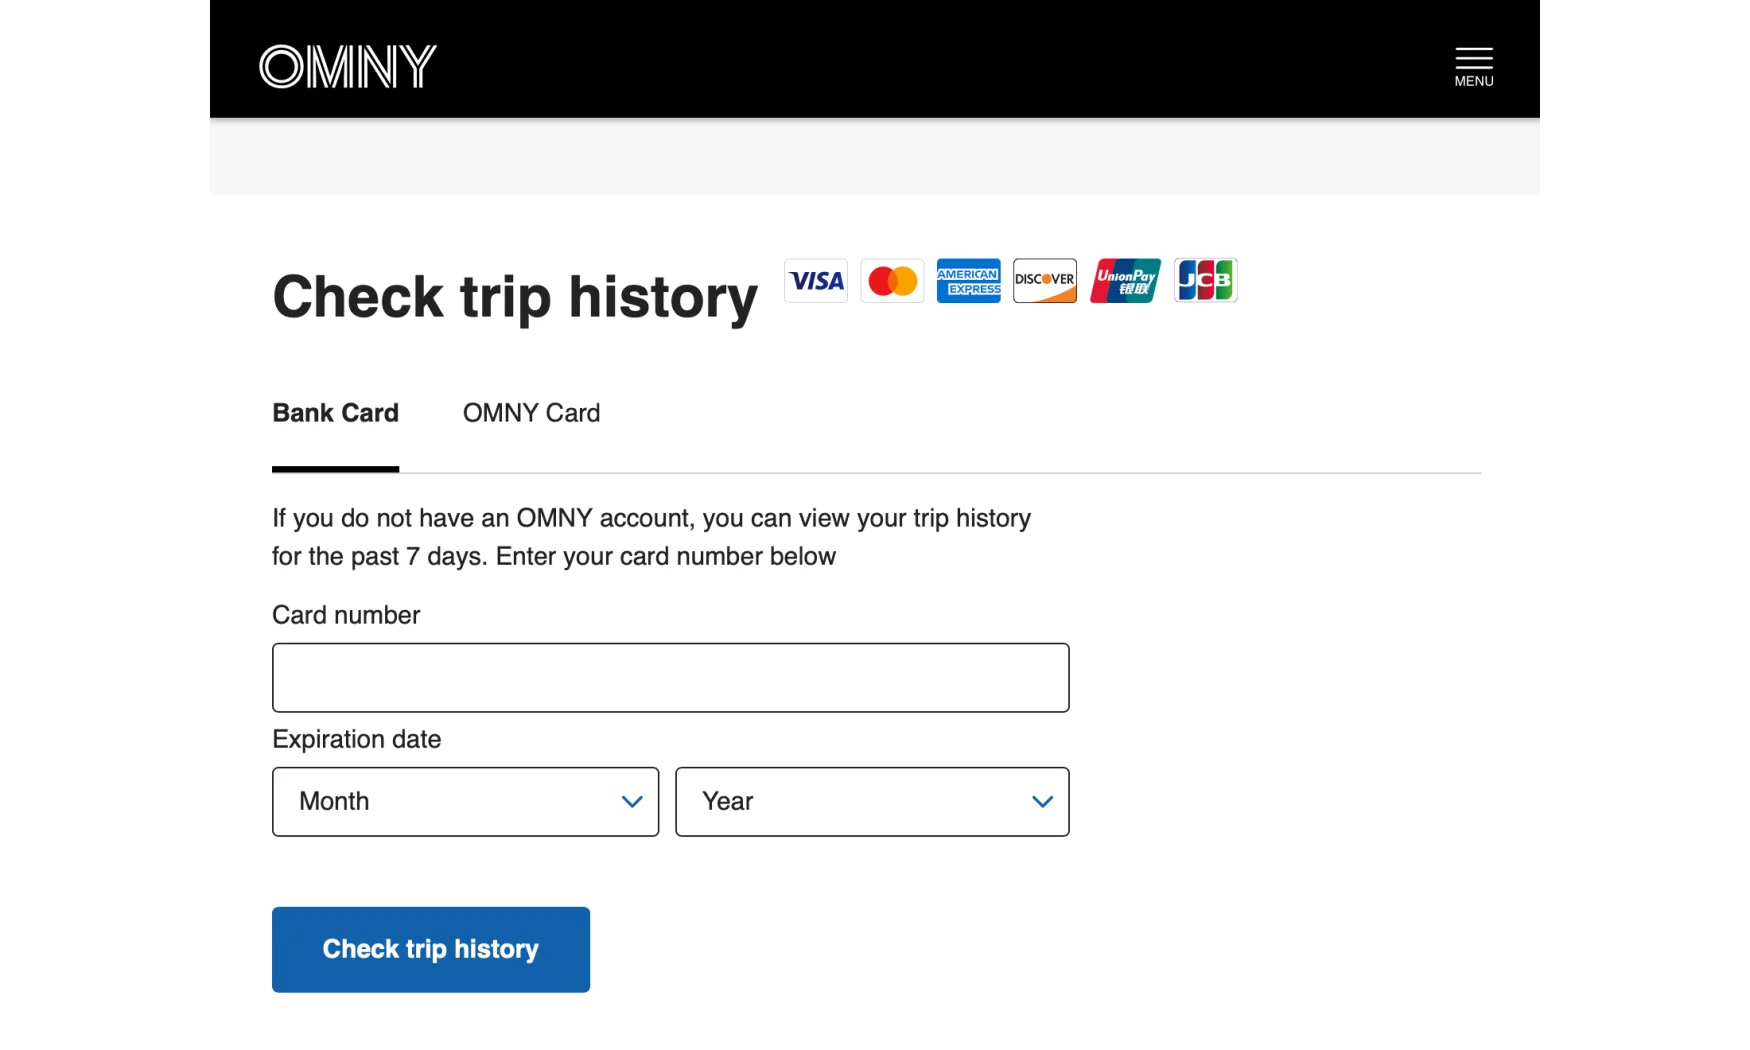 The ‘check trip history’ section of the OMNY website. It includes entry fields for entering a credit card number and expiration date.